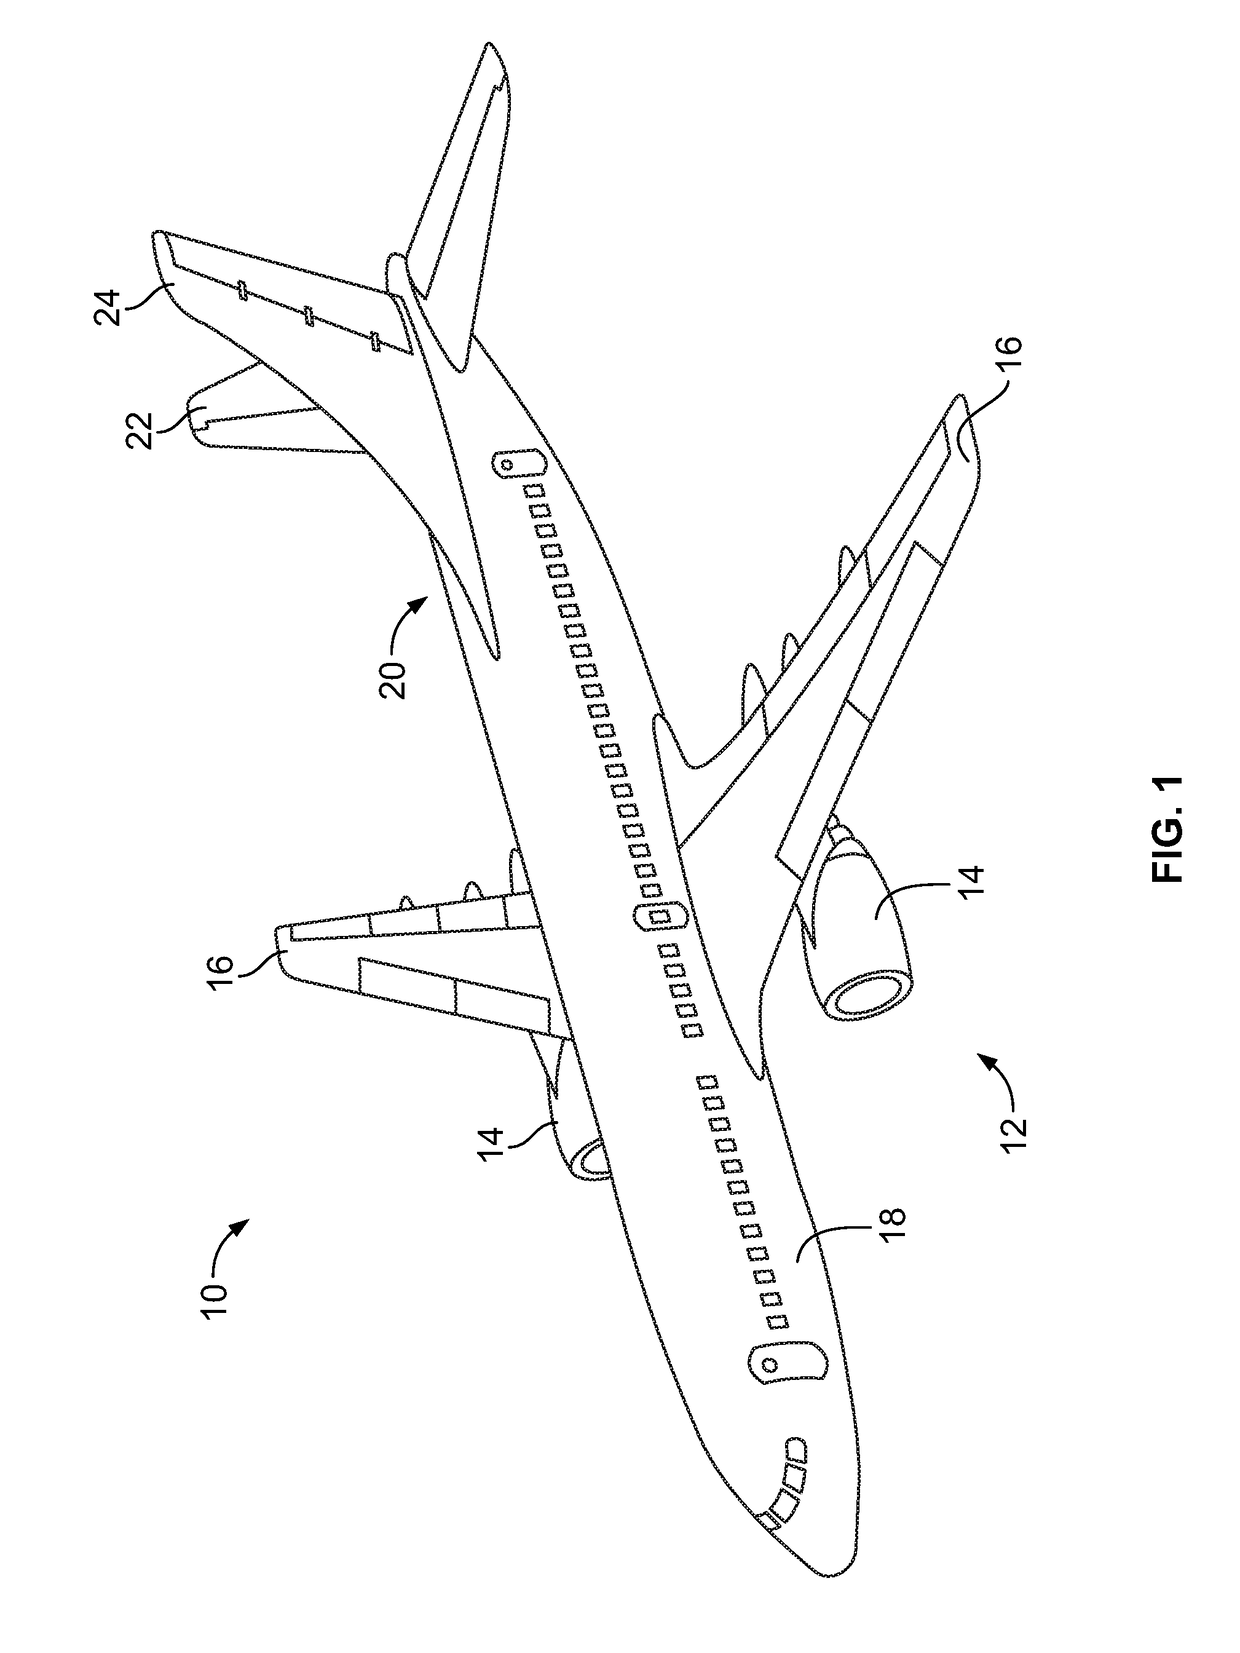 Systems and methods for cleaning interior portions of a vehicle